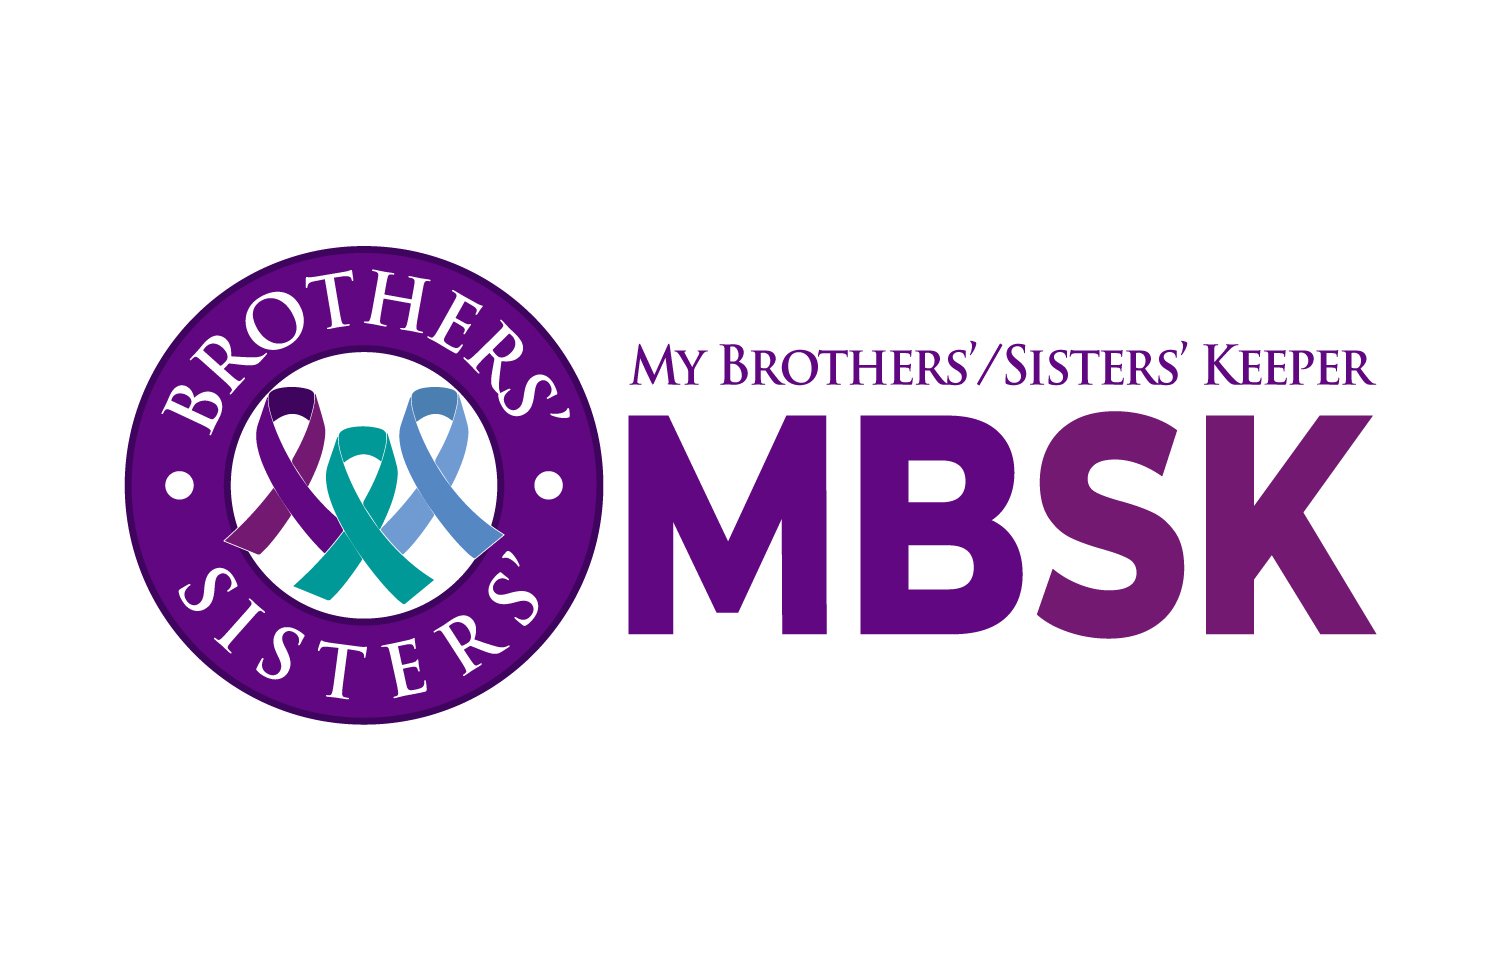 “My Brothers’ Keeper” & <br> “My Sisters’ Keeper”